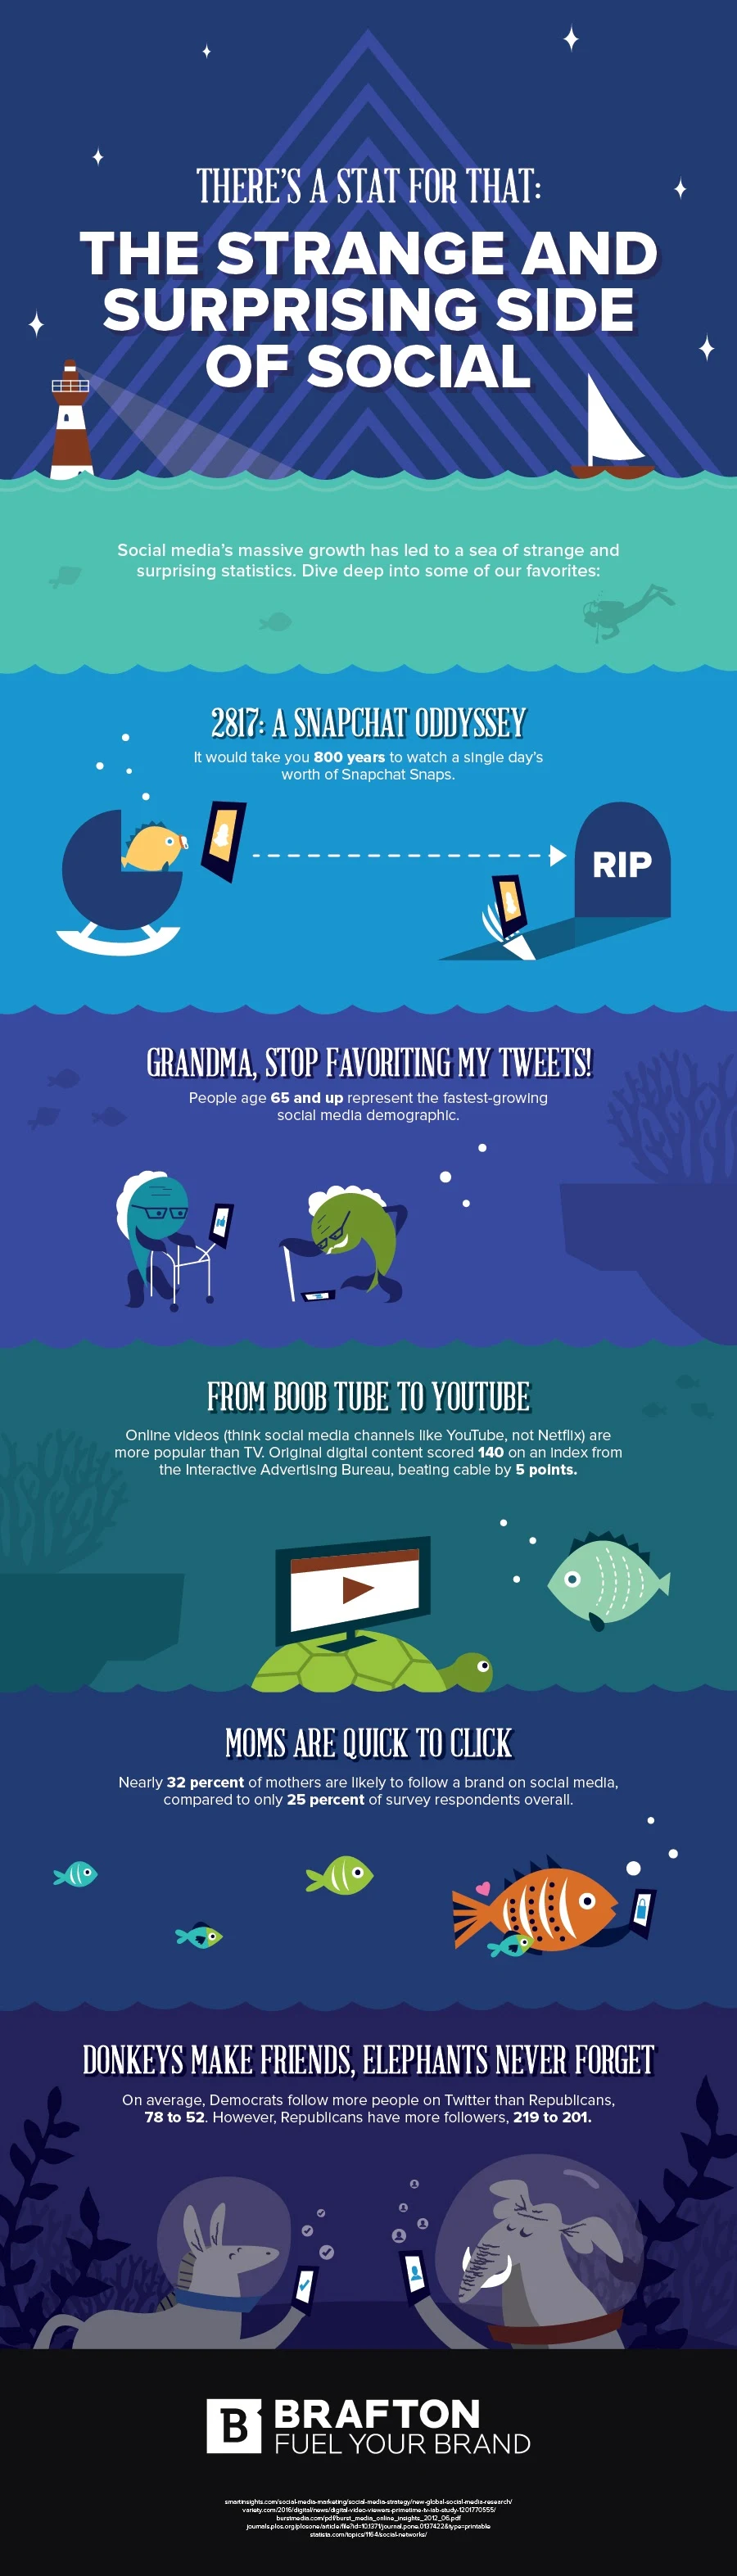 There's a Stat For That: The Strange And Surprising Side Of Social - #infographic